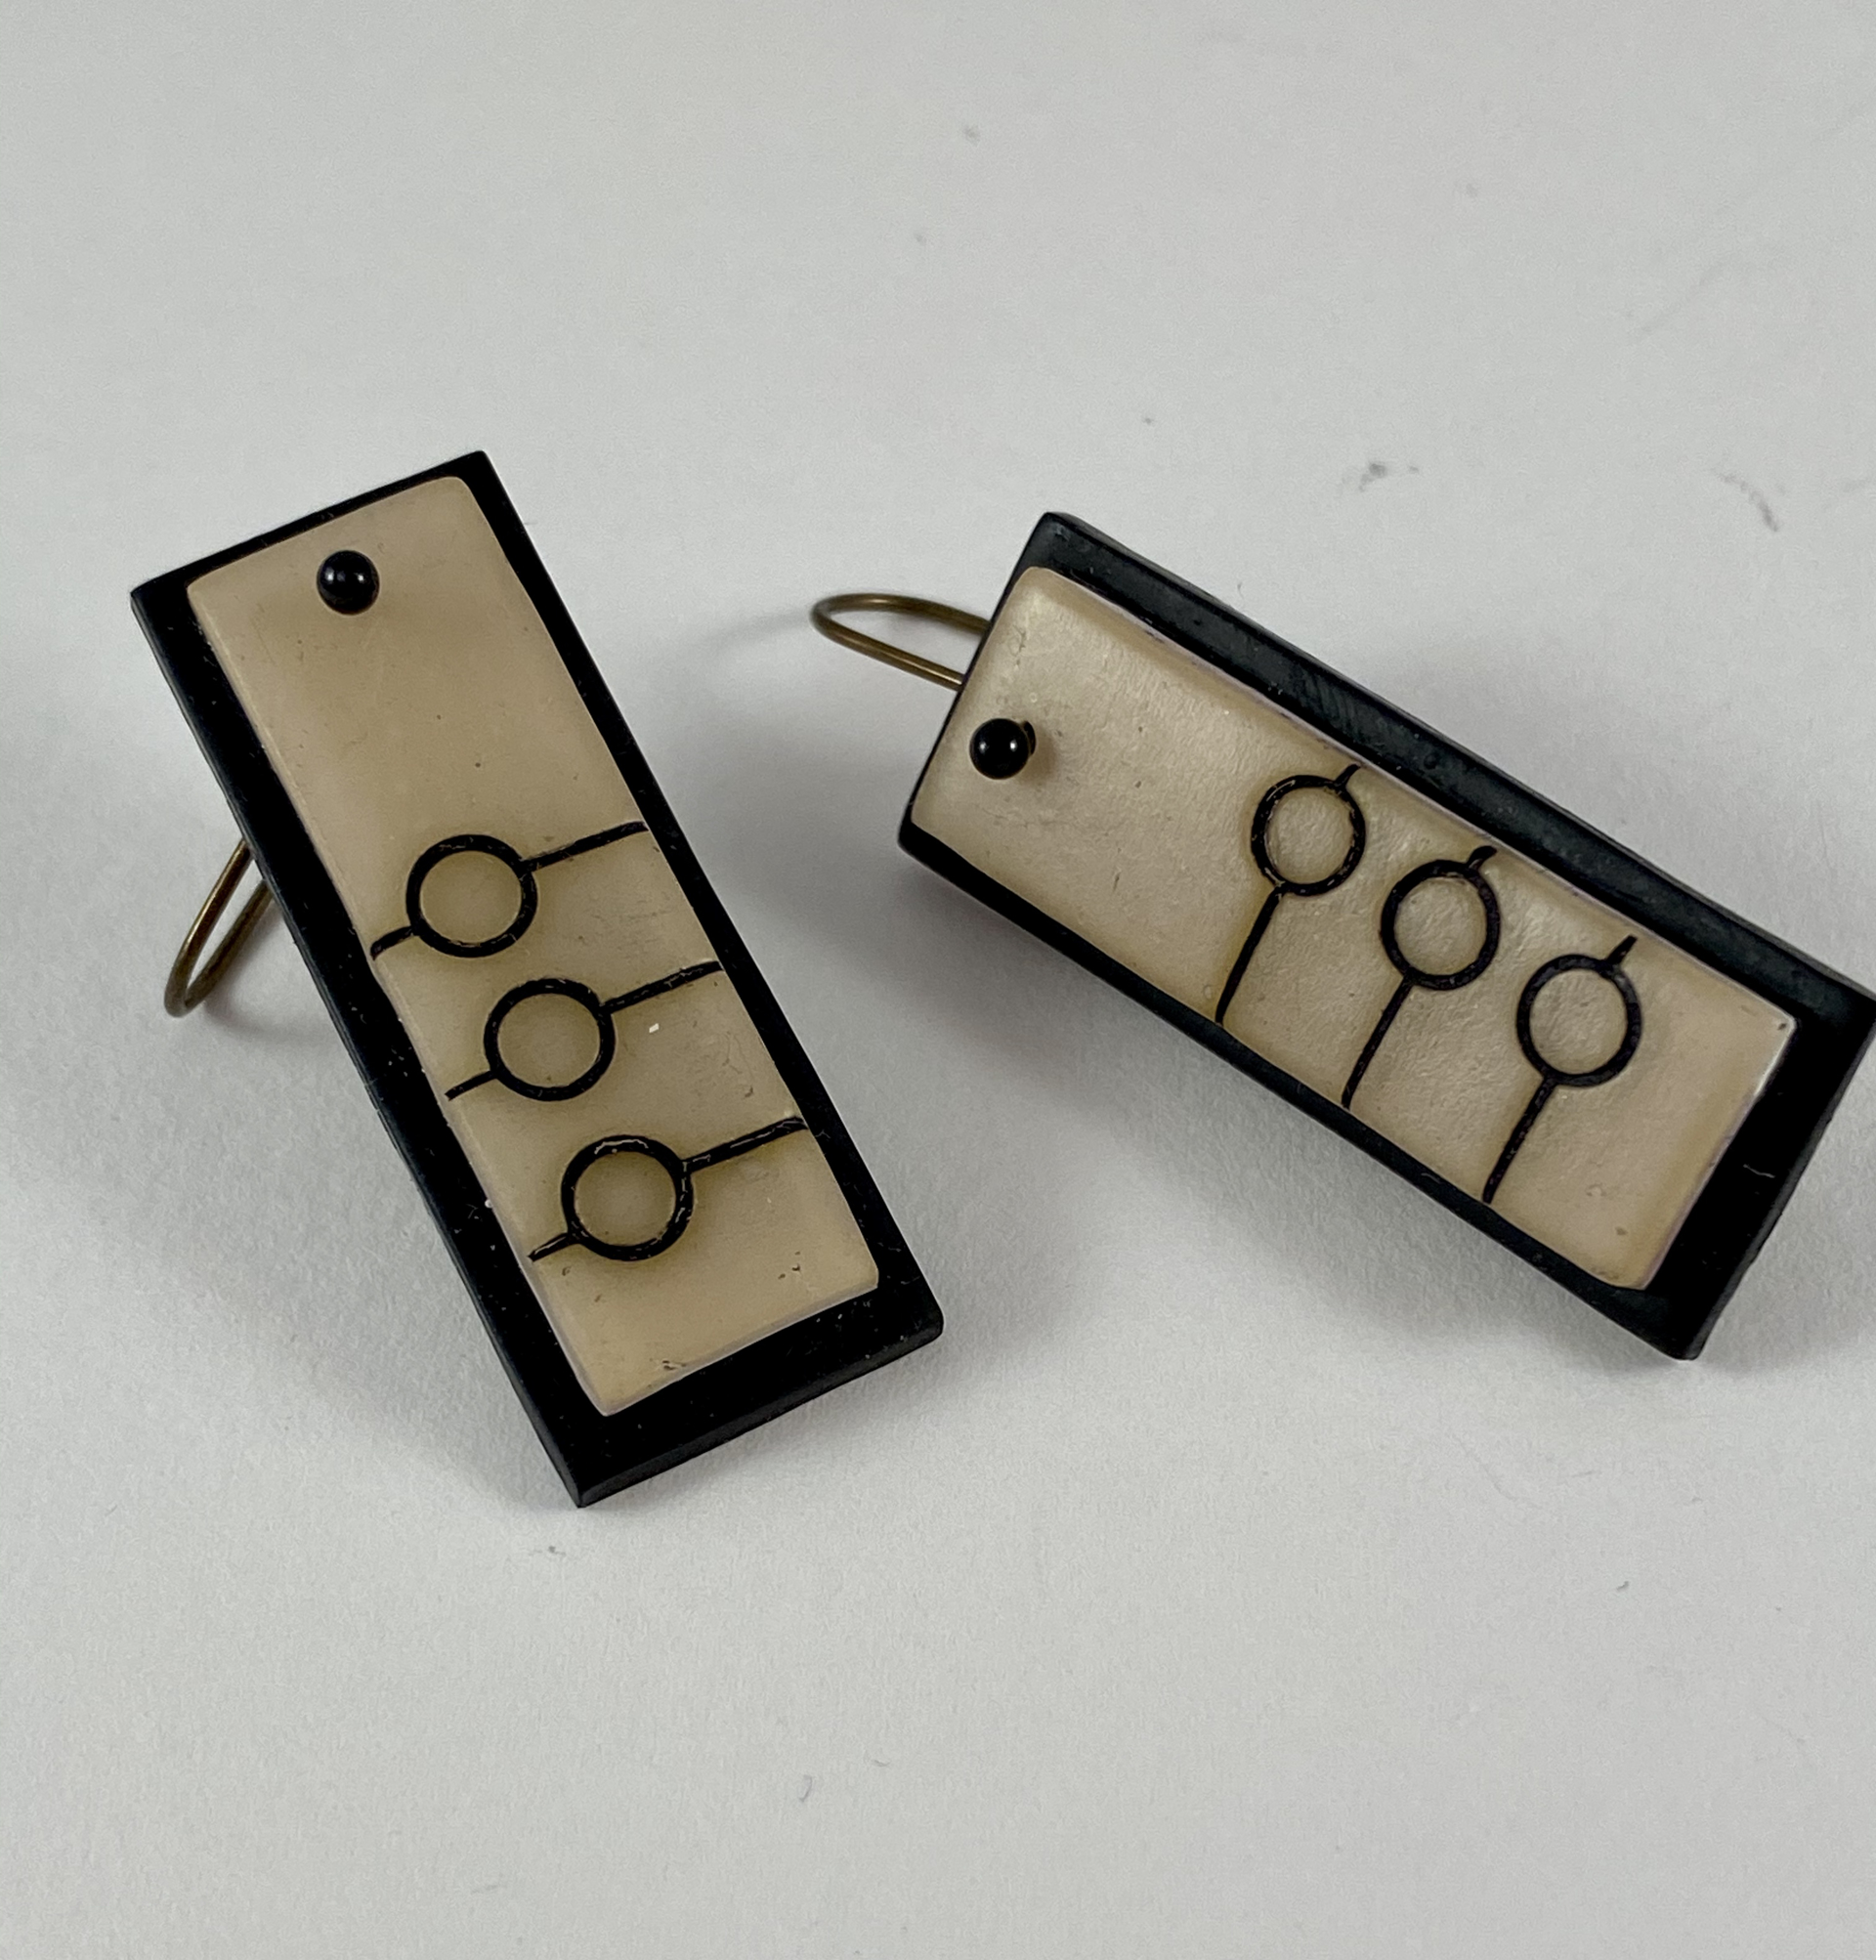 Tan and Black Graphic earring by Nancy Roth